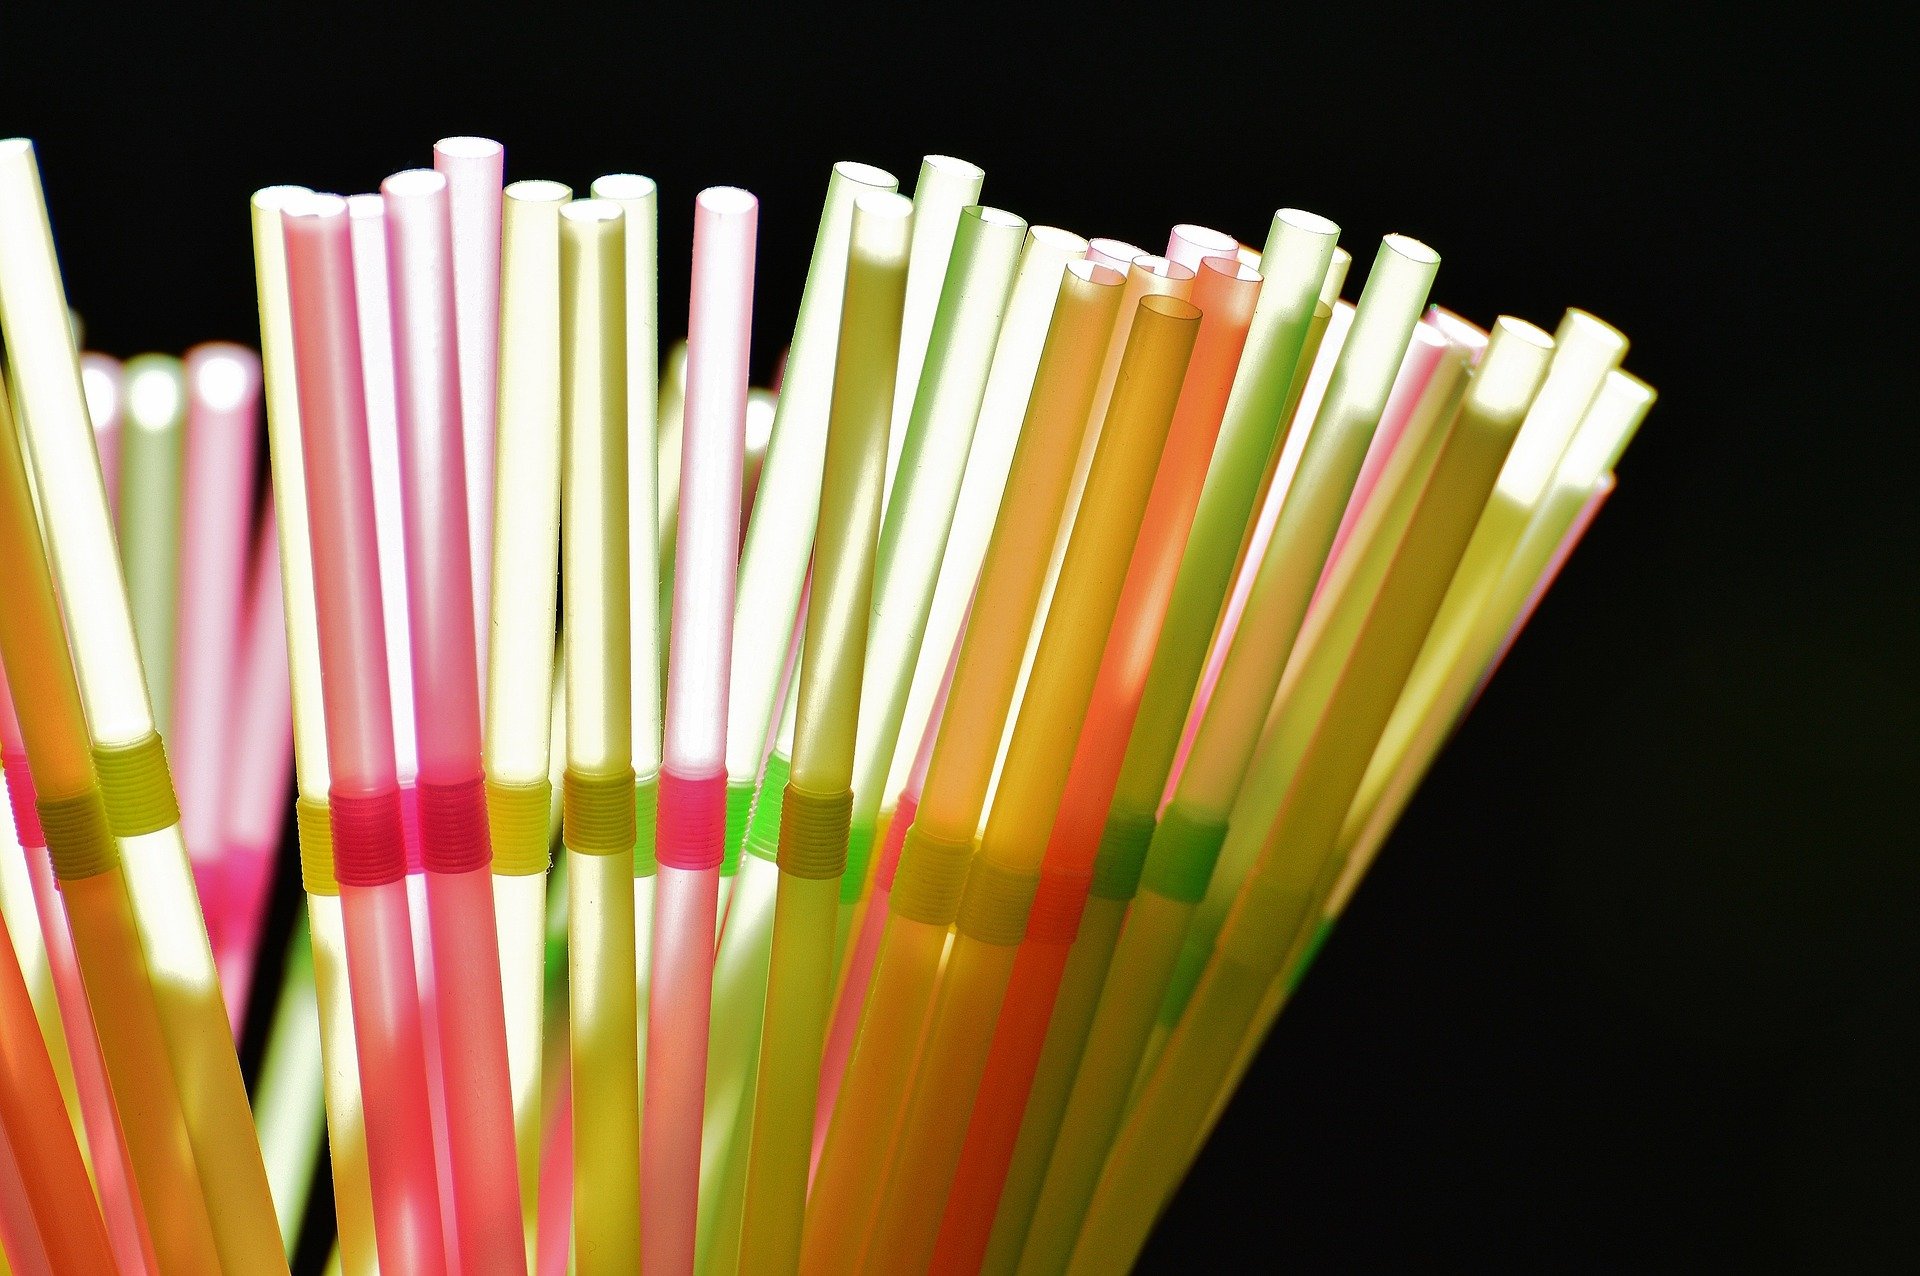 Germany to ban plastic straws by mid-2021